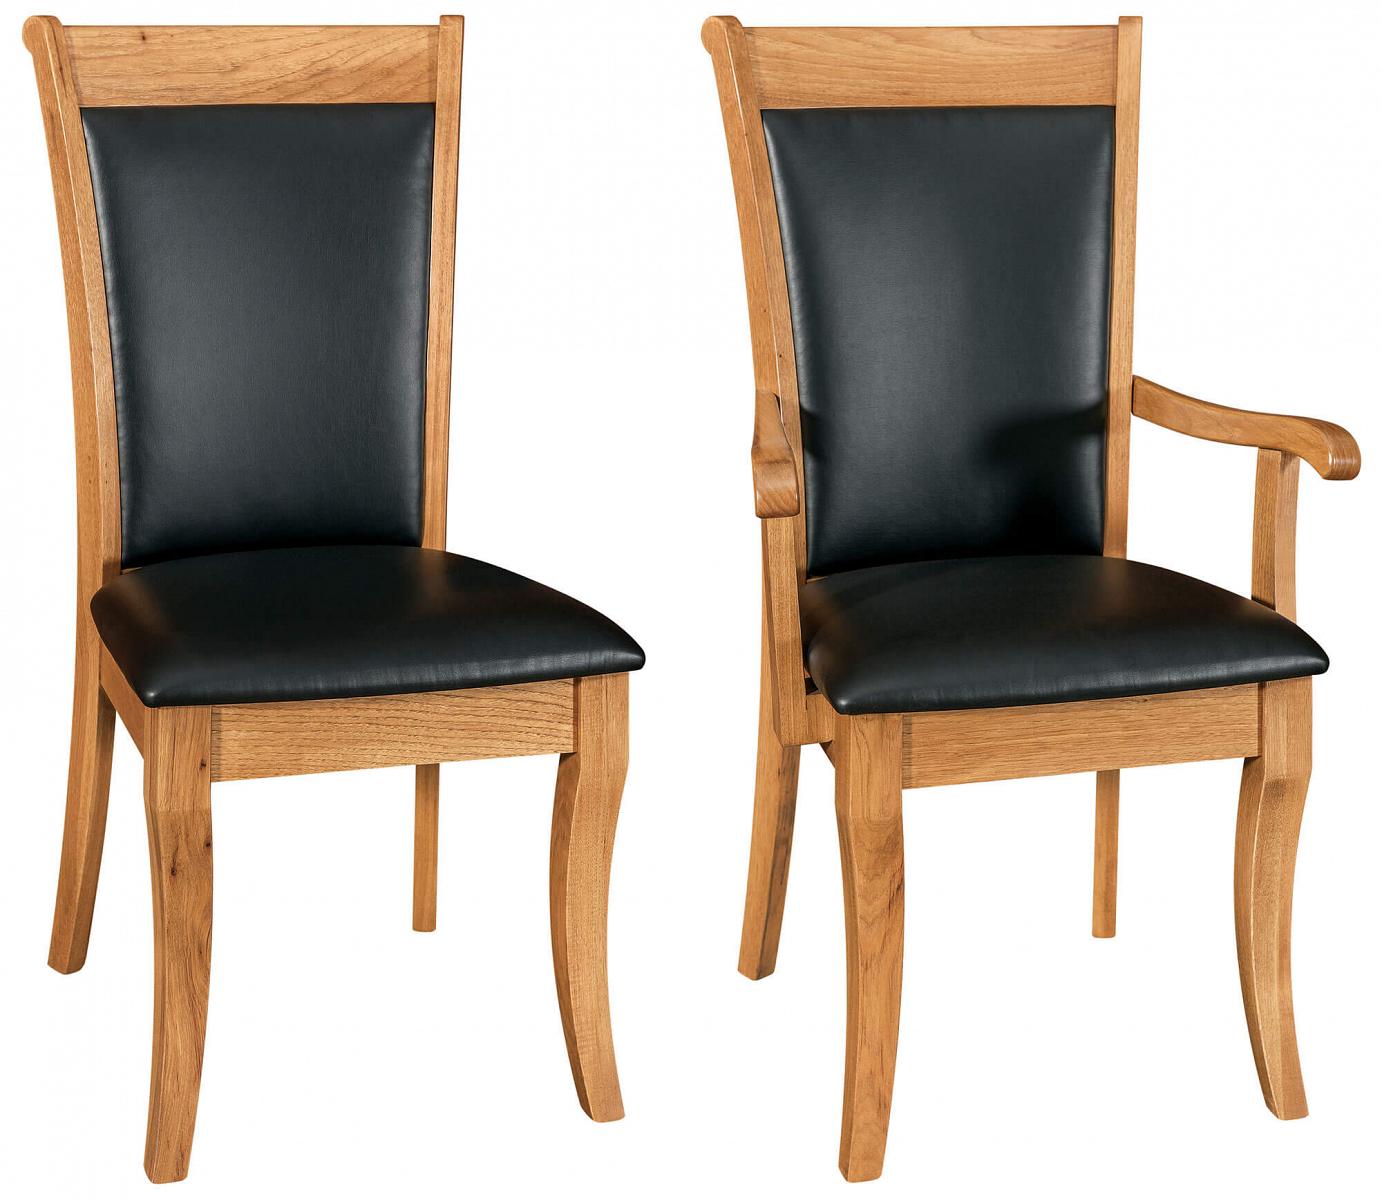 RH Yoder Acadia Chairs